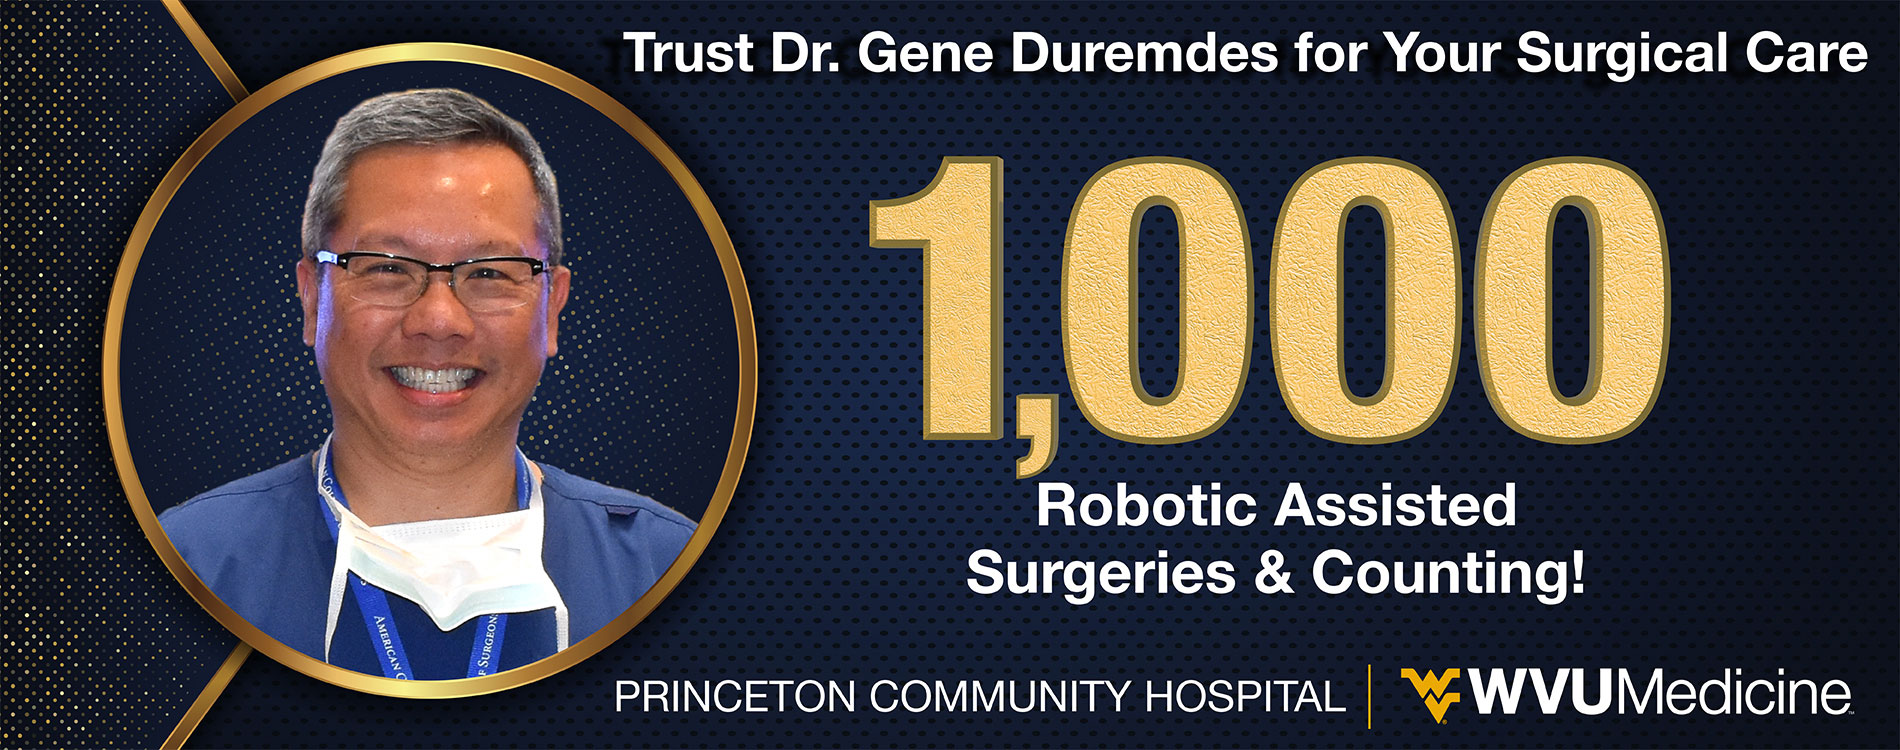 Trust Dr. Gene Duremdes for your surgical care 1,000 Robotic Assisted Surgeries and counting!